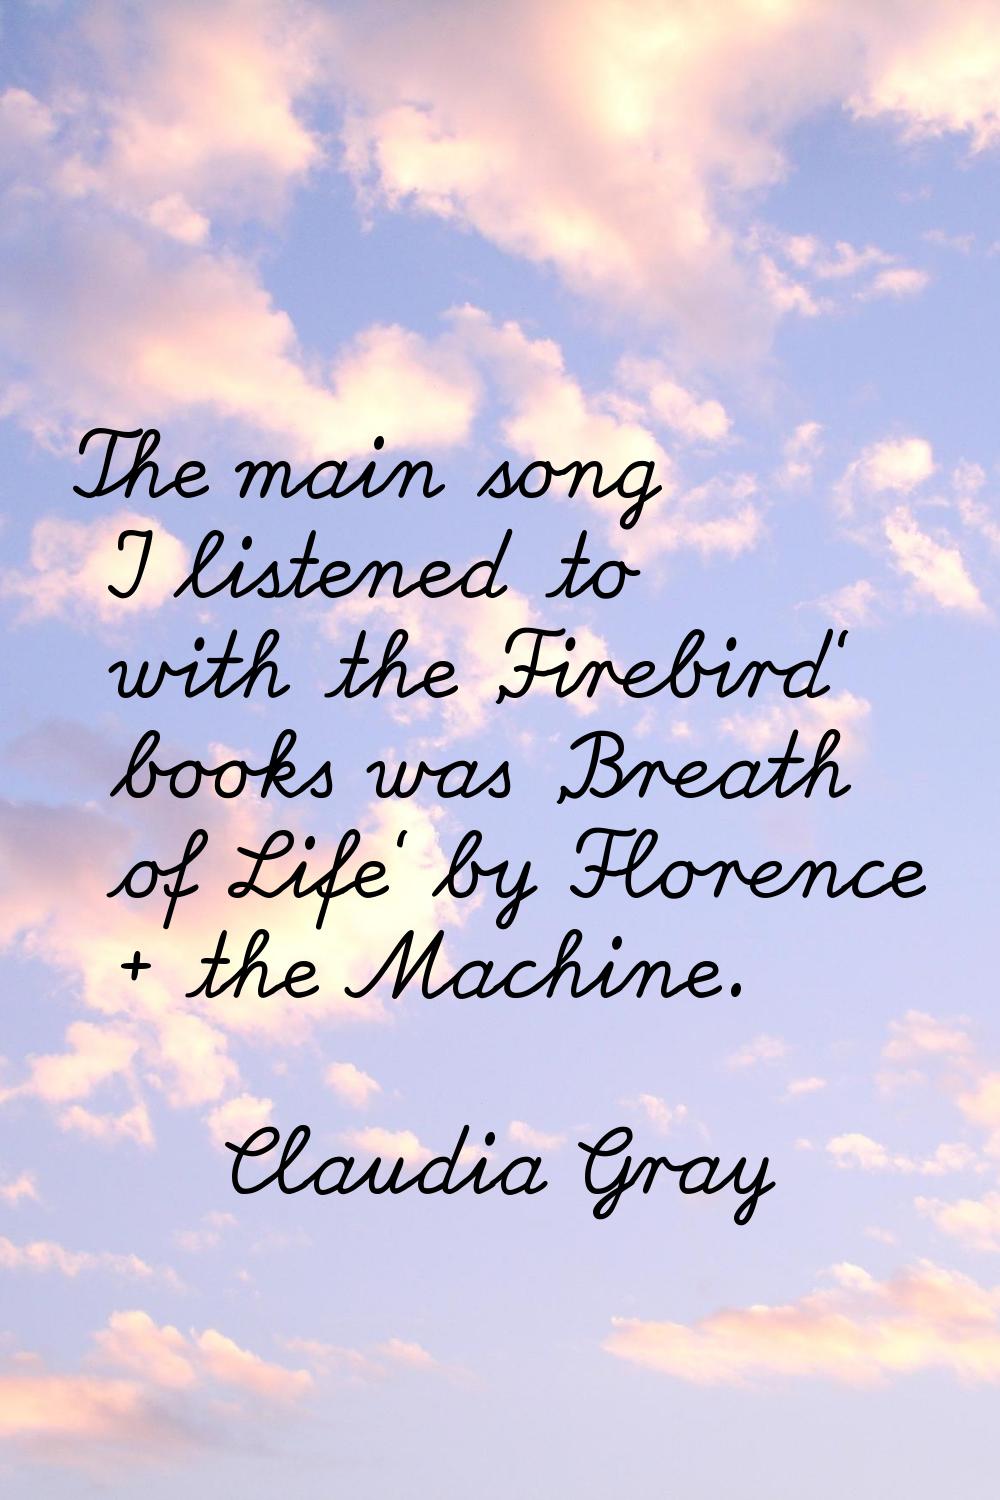 The main song I listened to with the 'Firebird' books was 'Breath of Life' by Florence + the Machin